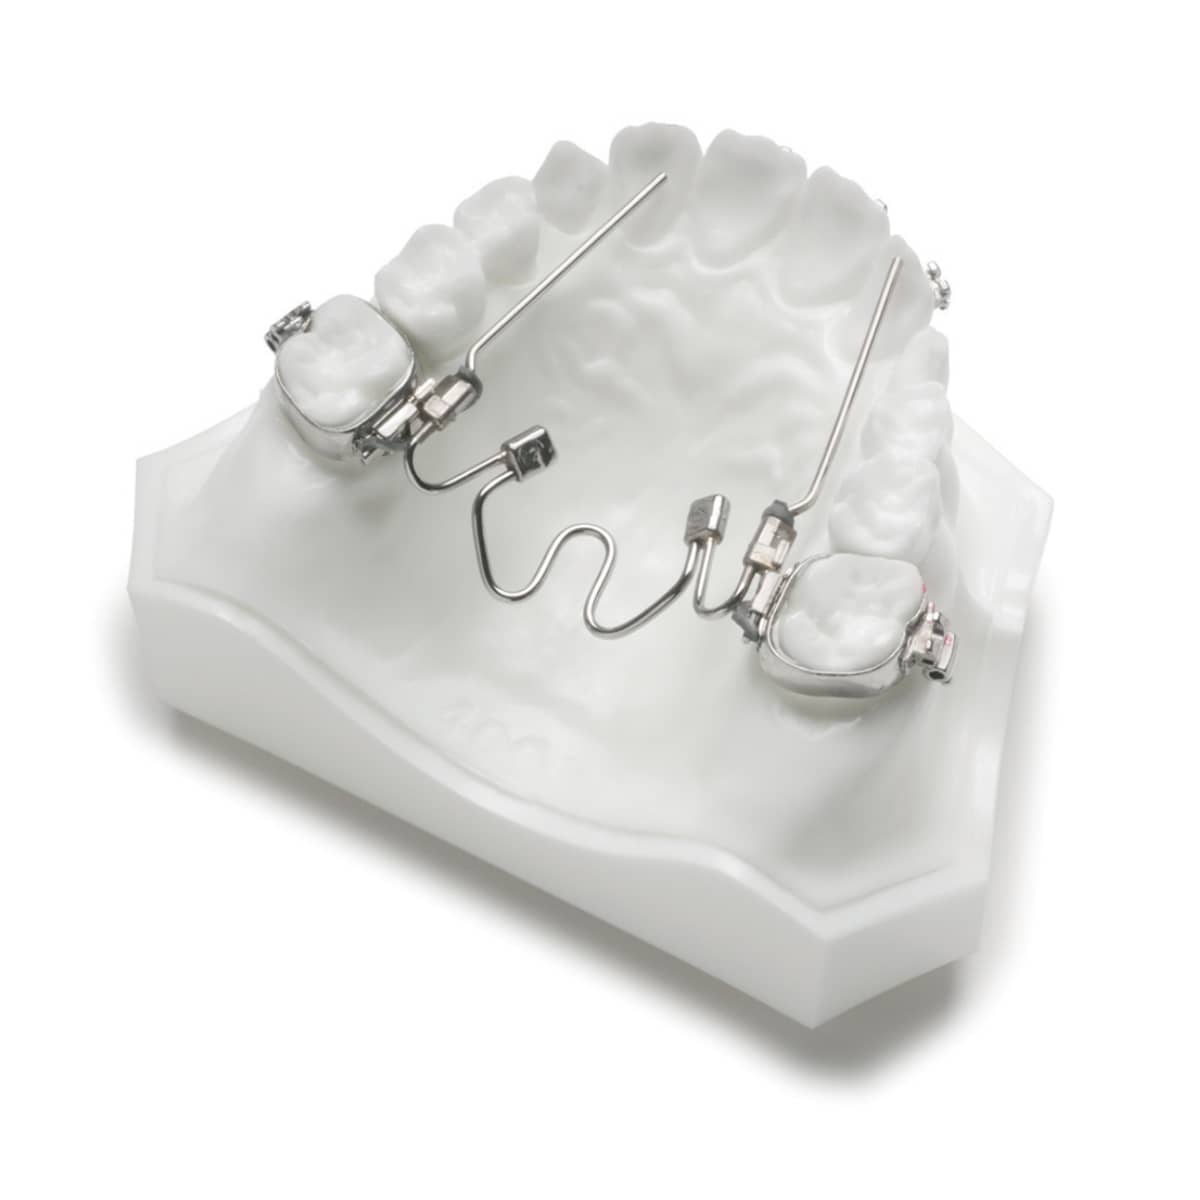 W arch expander - a revolutionary solution for dental arch expansion